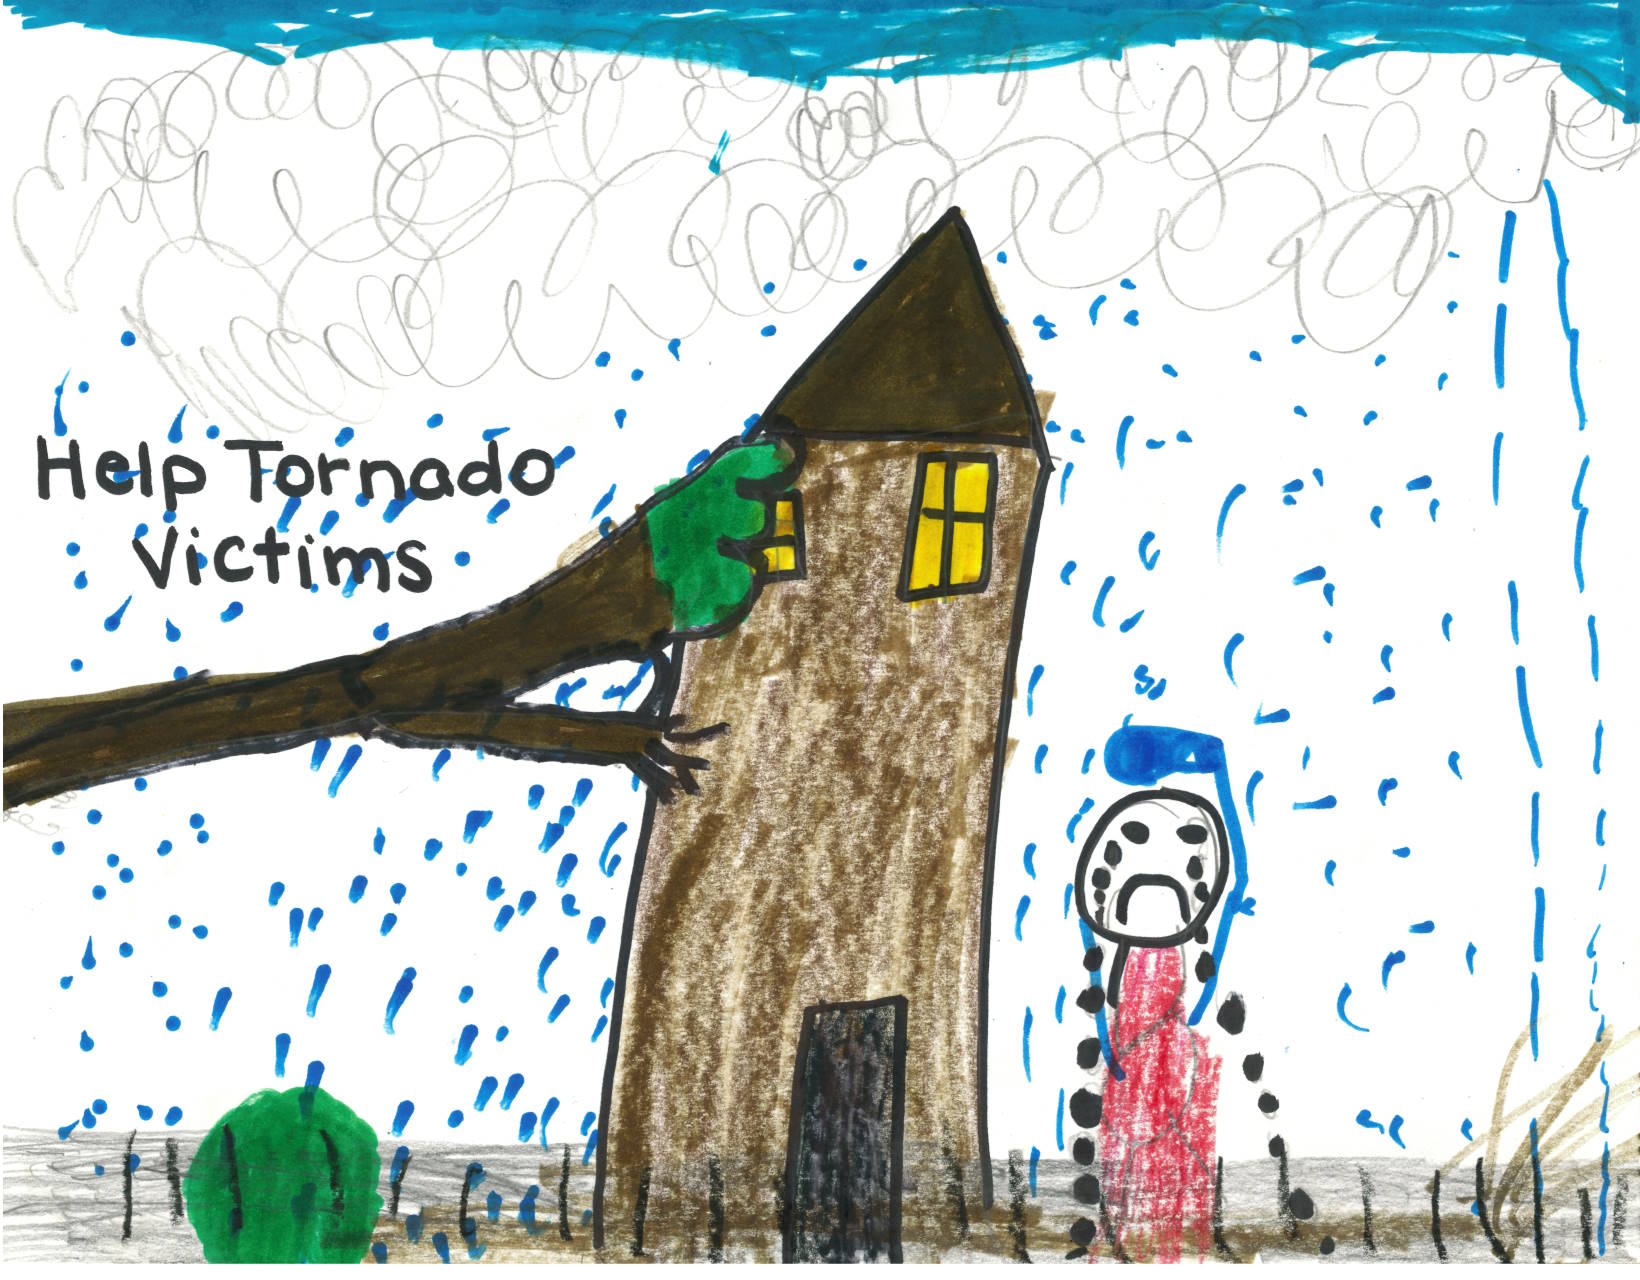 Children's drawing of a tornado with rain and a house with a tree that has fallen on it. A man is crying.